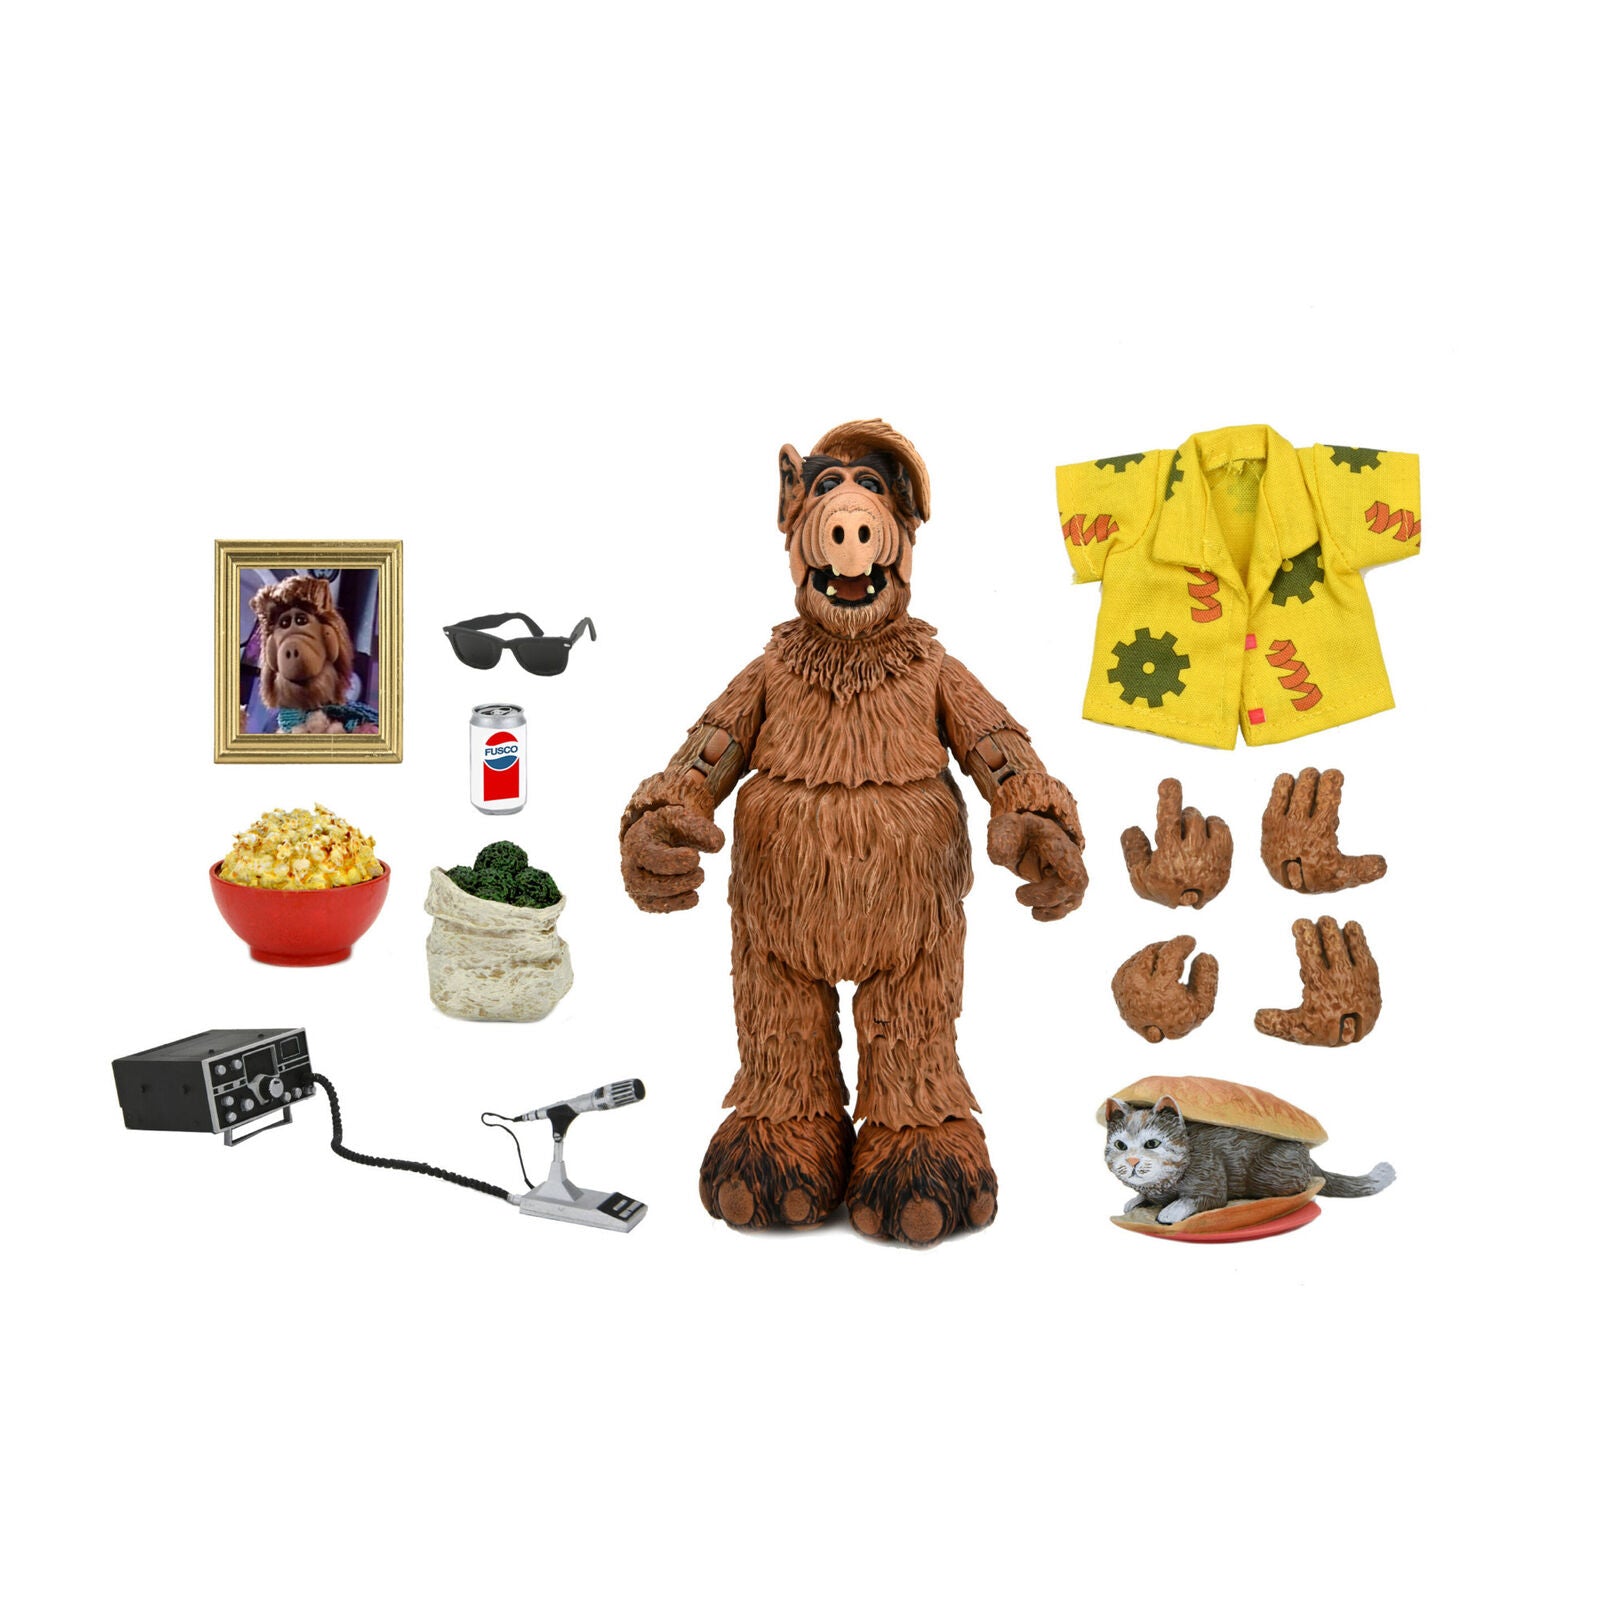 Alf Ultimate (Alien Life Form) 7-Inch Scale Action Figure